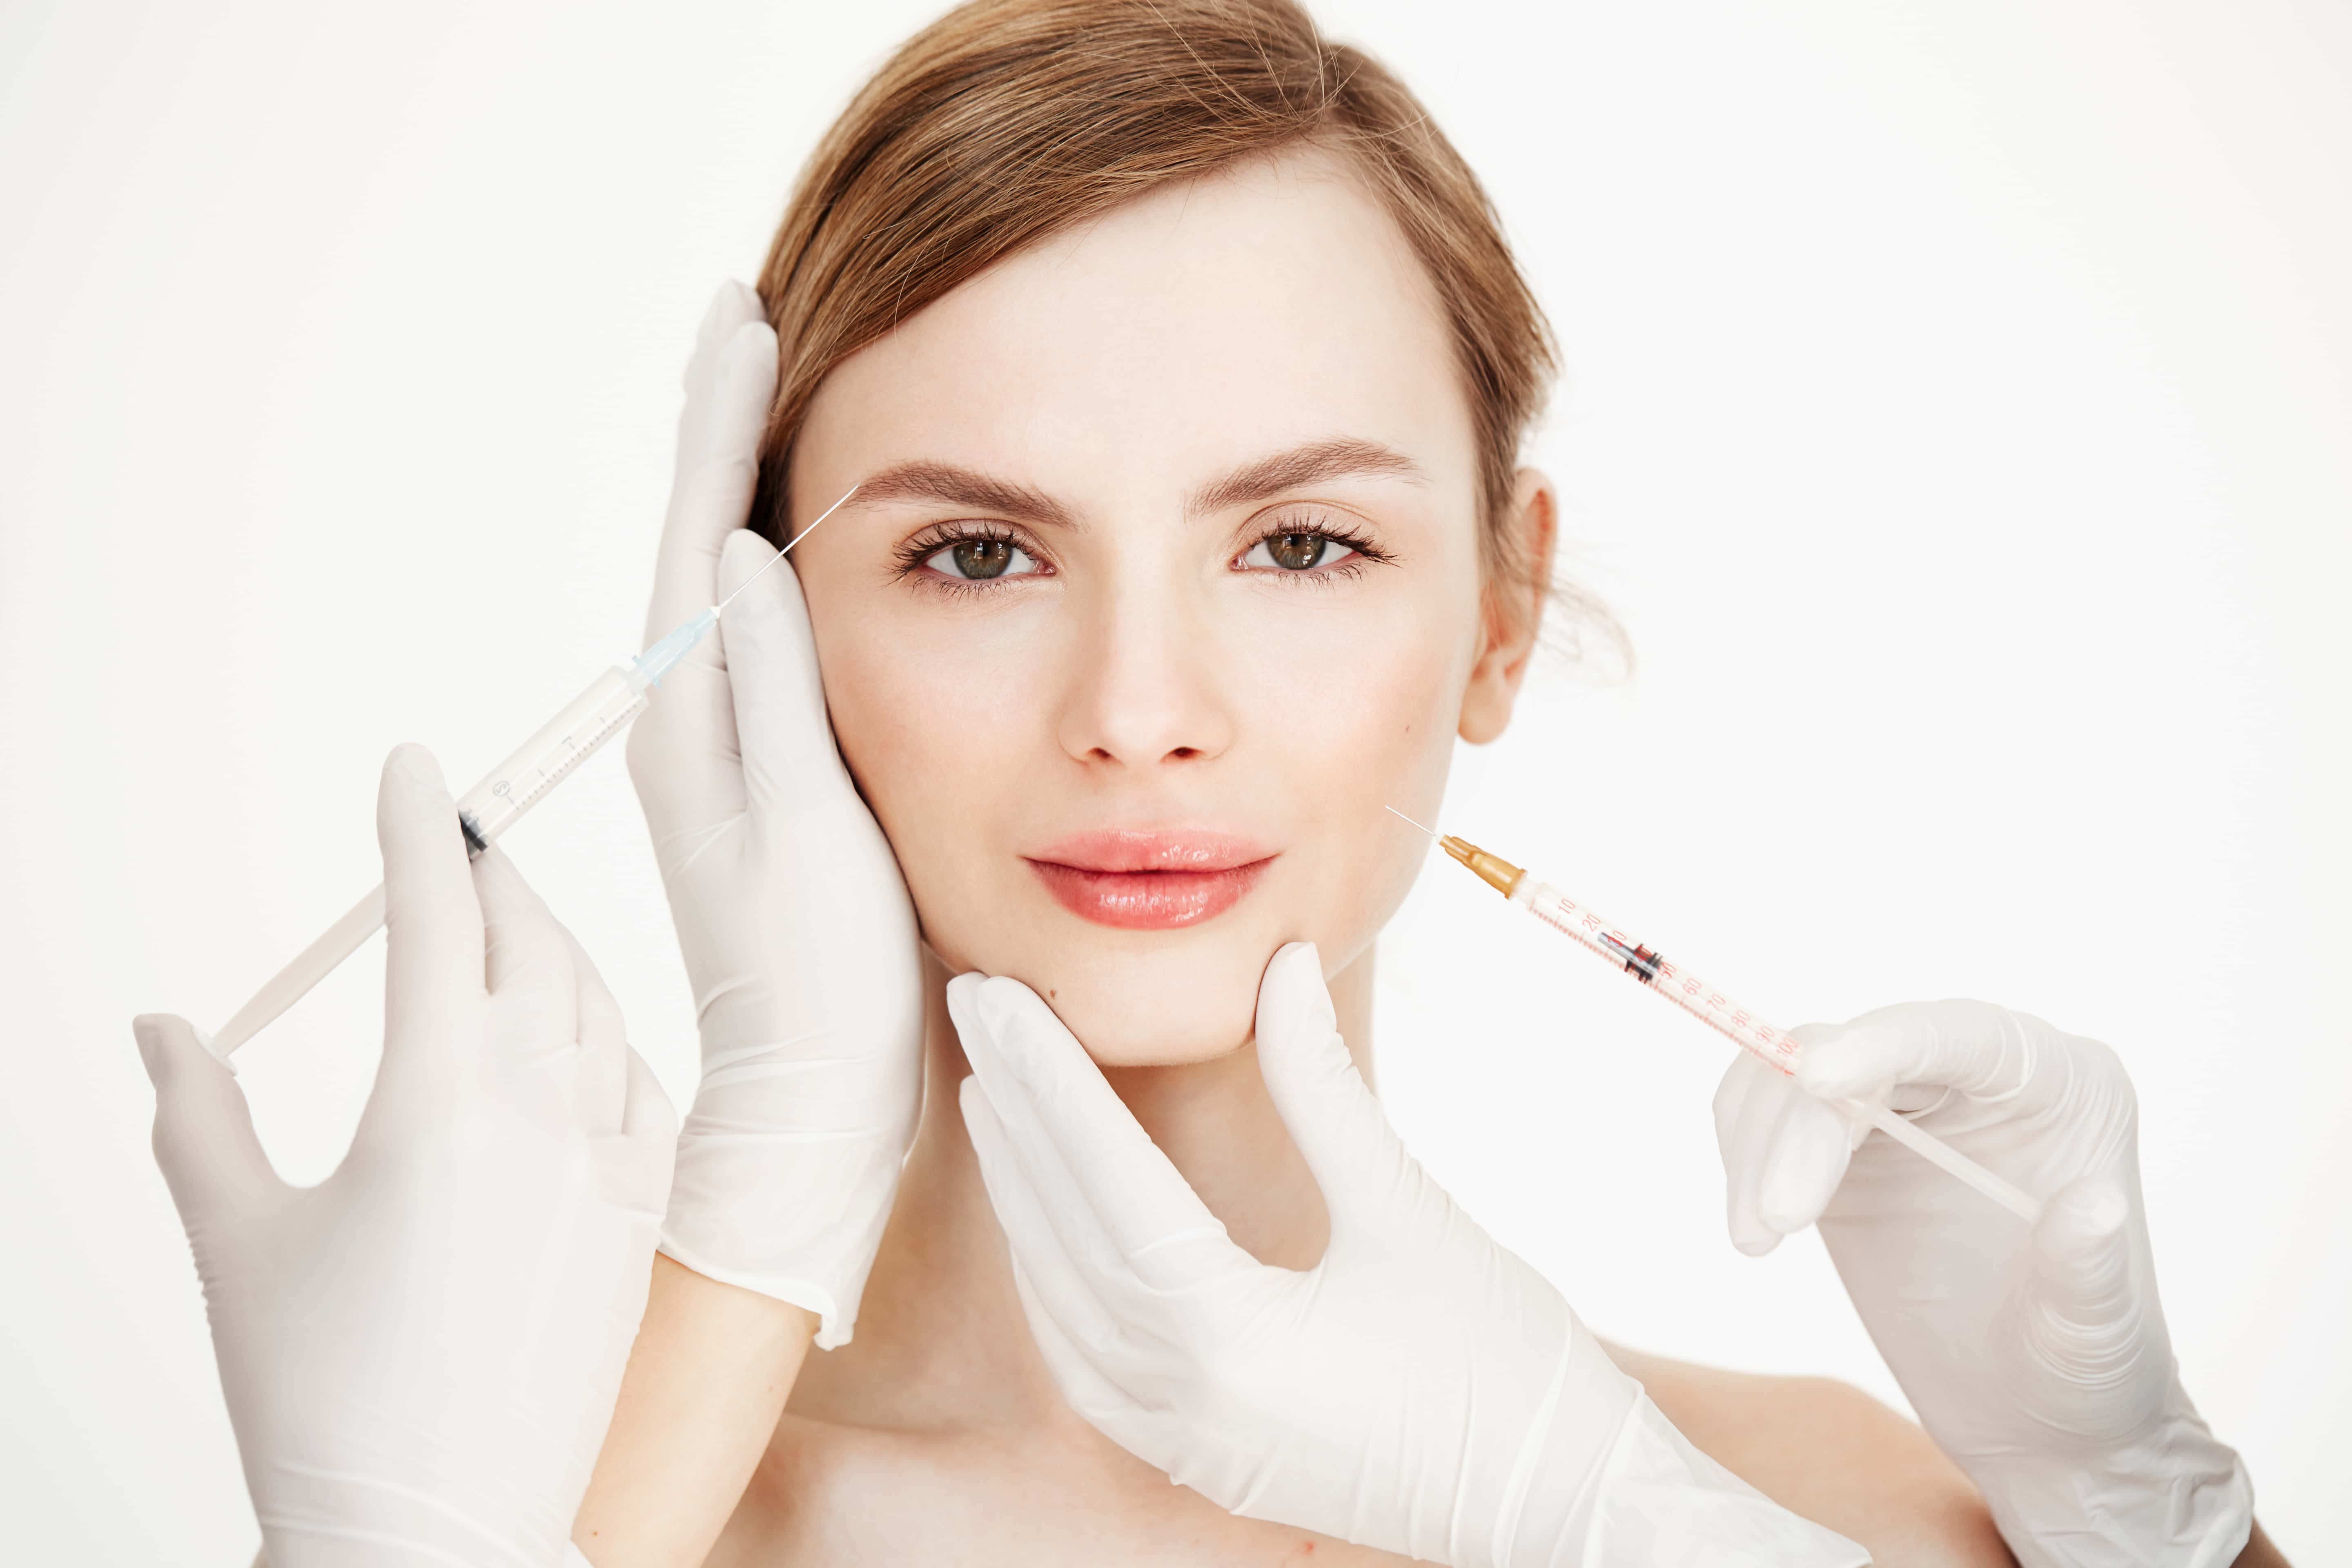 Combination Of Botox And Dermal Fillers: Why Is It A Good Option?